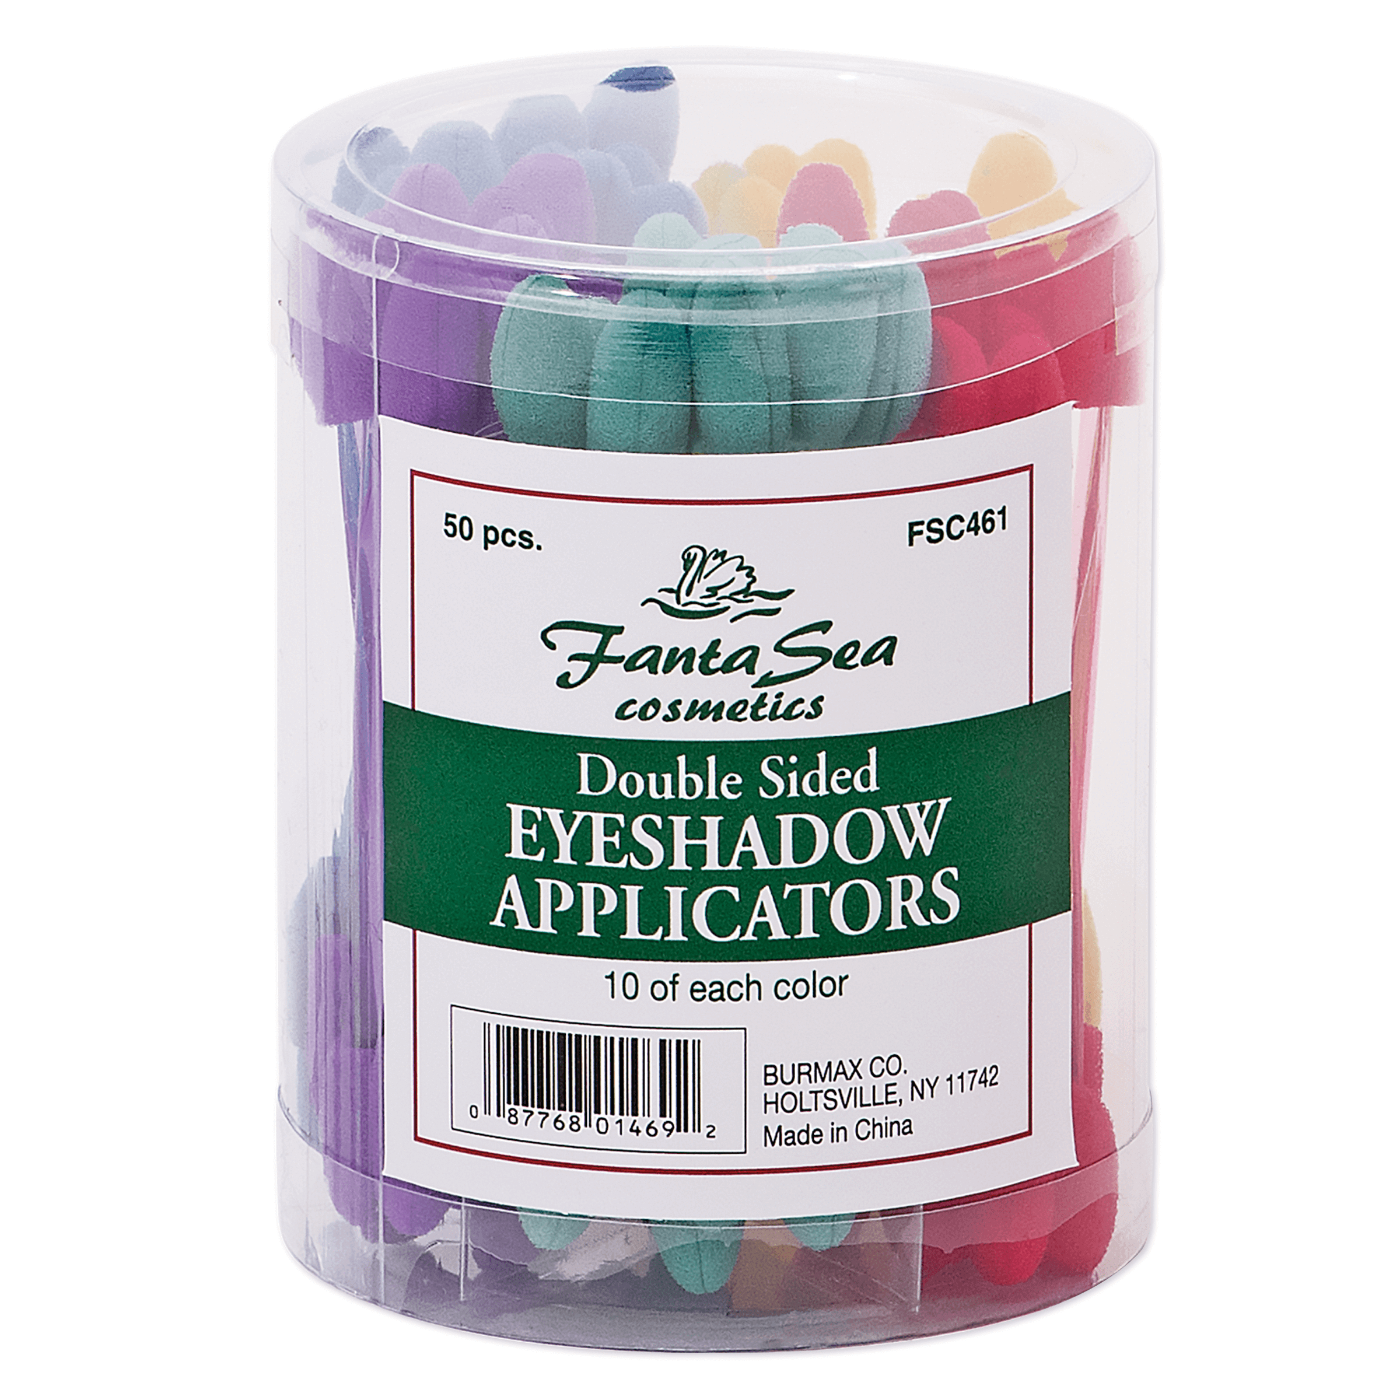 Eyeshadow Applicators - 50 in a container